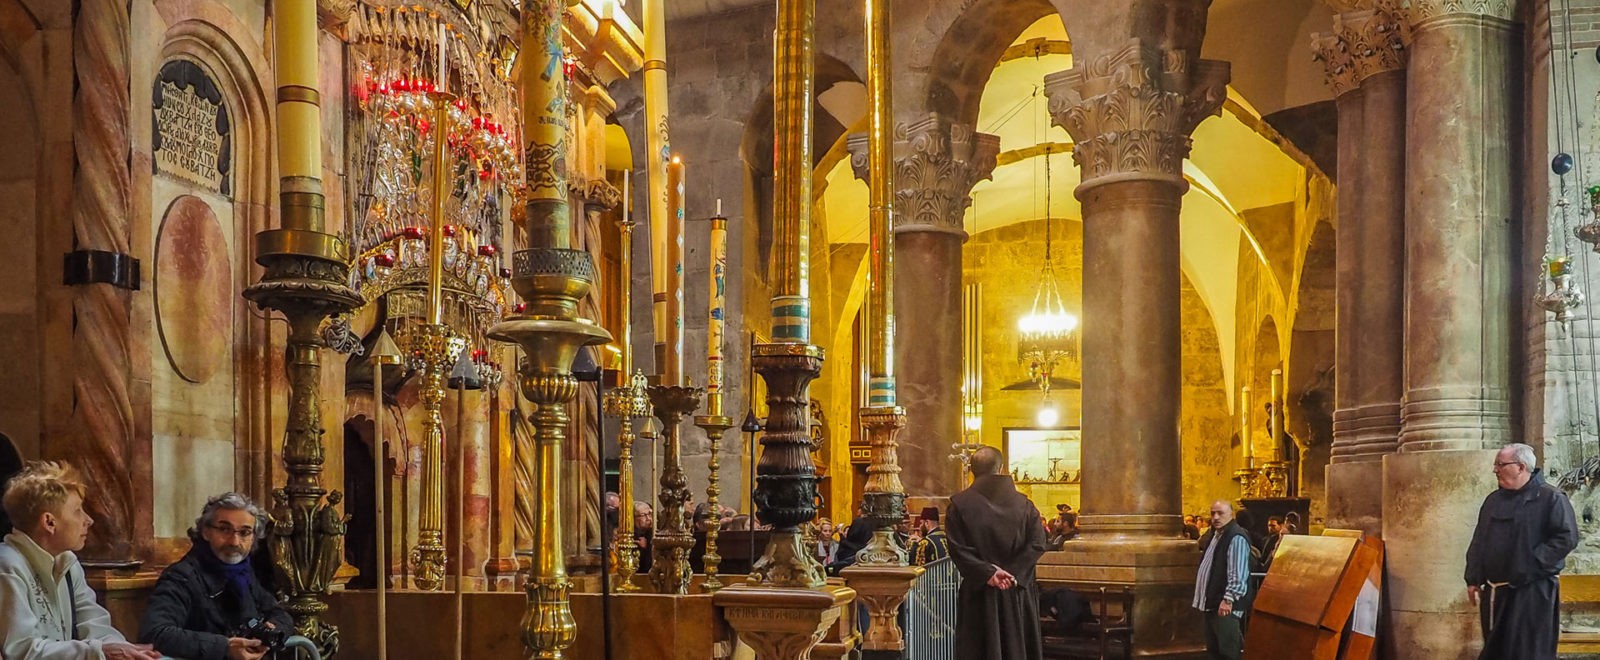 church of the holy Sepulchre